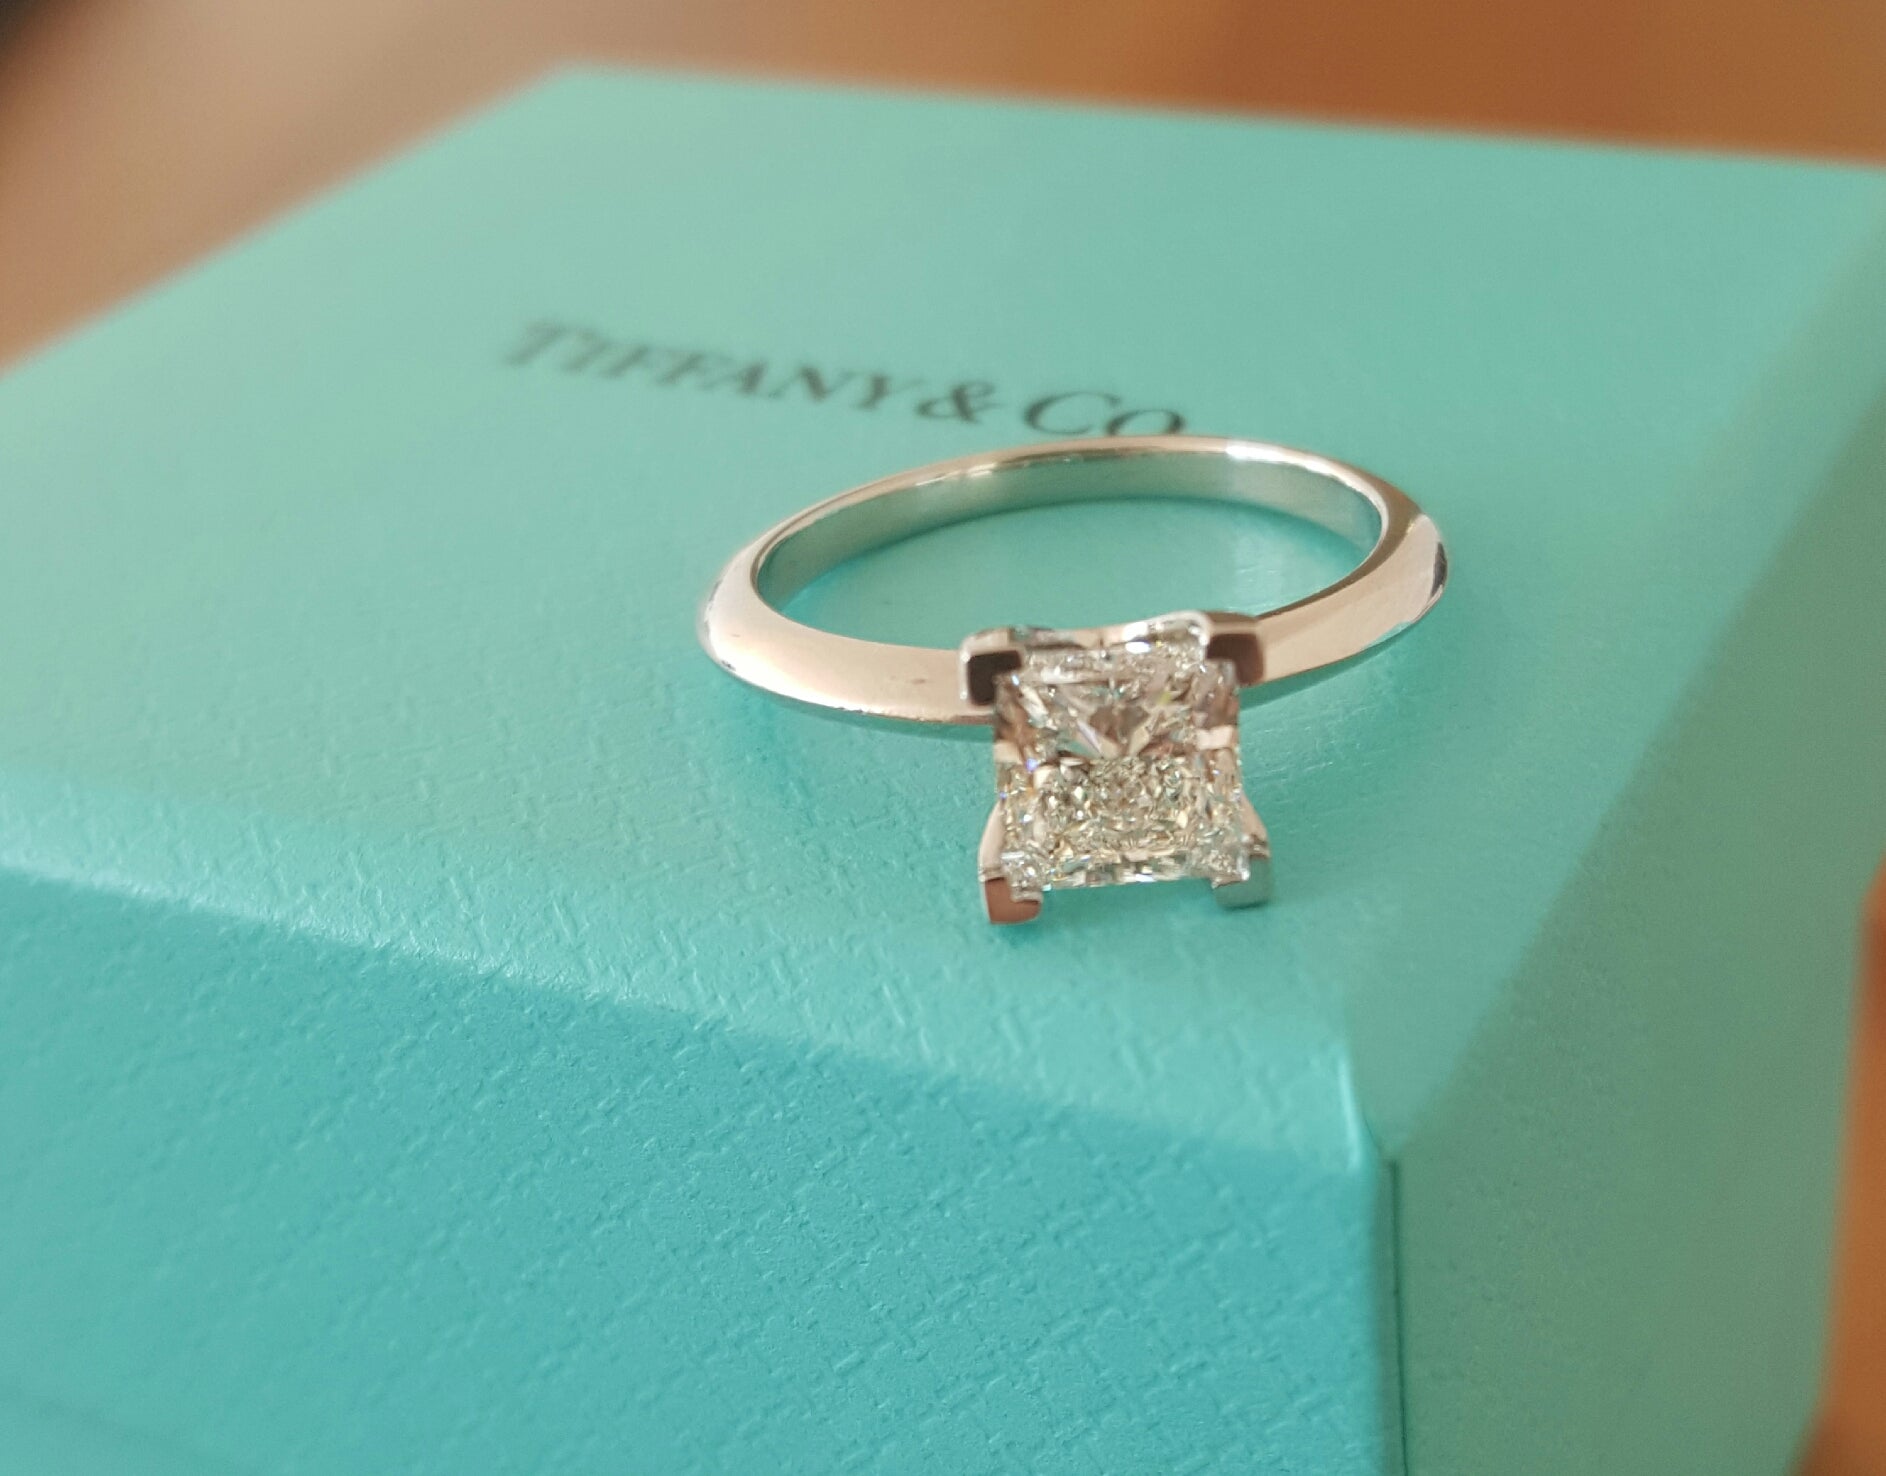 The Modern Alternatives to the Tiffany Engagement Ring